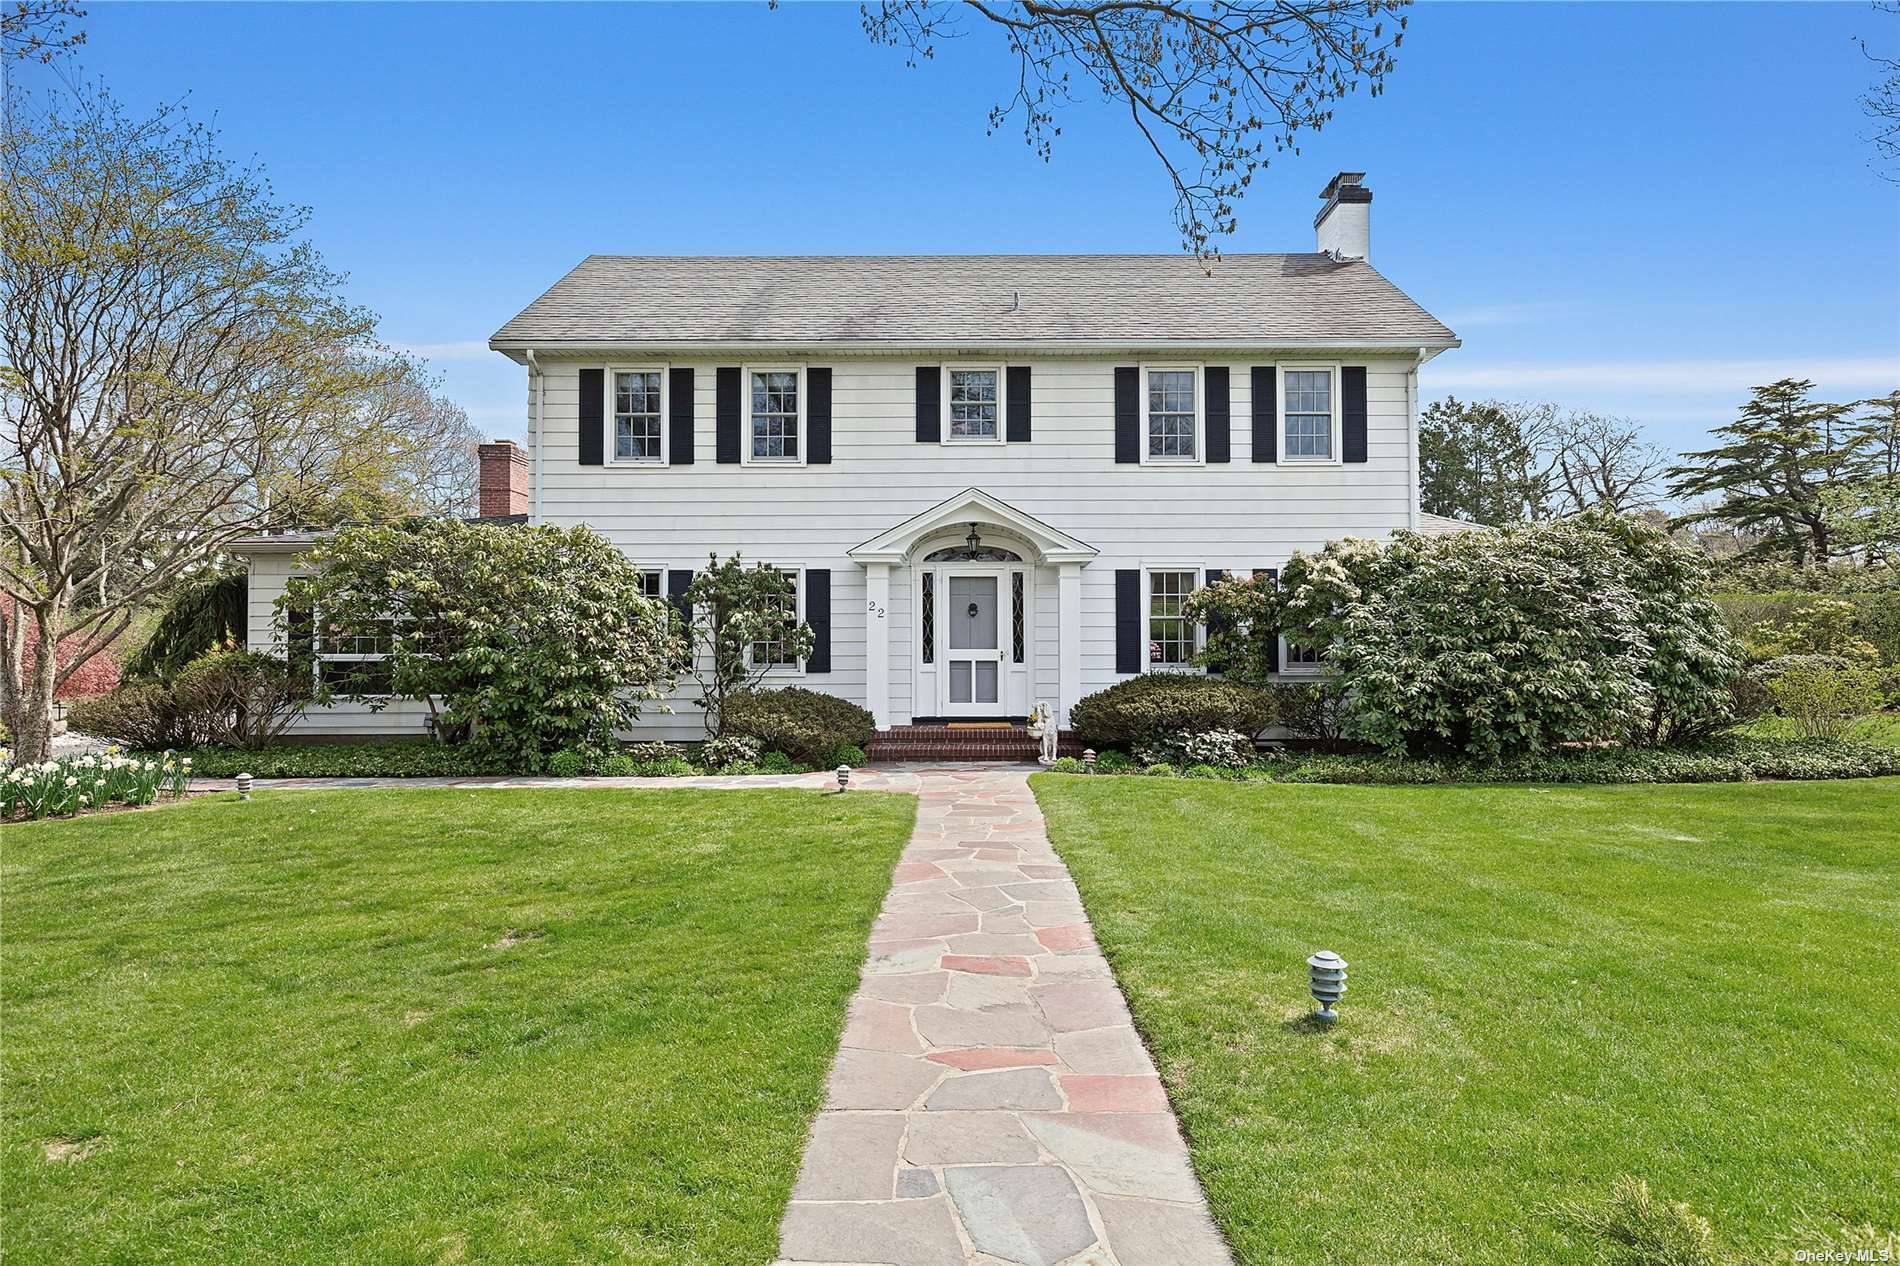 Moments from premier oceanfront beaches and the Village of Westhampton Beach sits an impeccably maintained and most elegant Traditional Hampton's home.